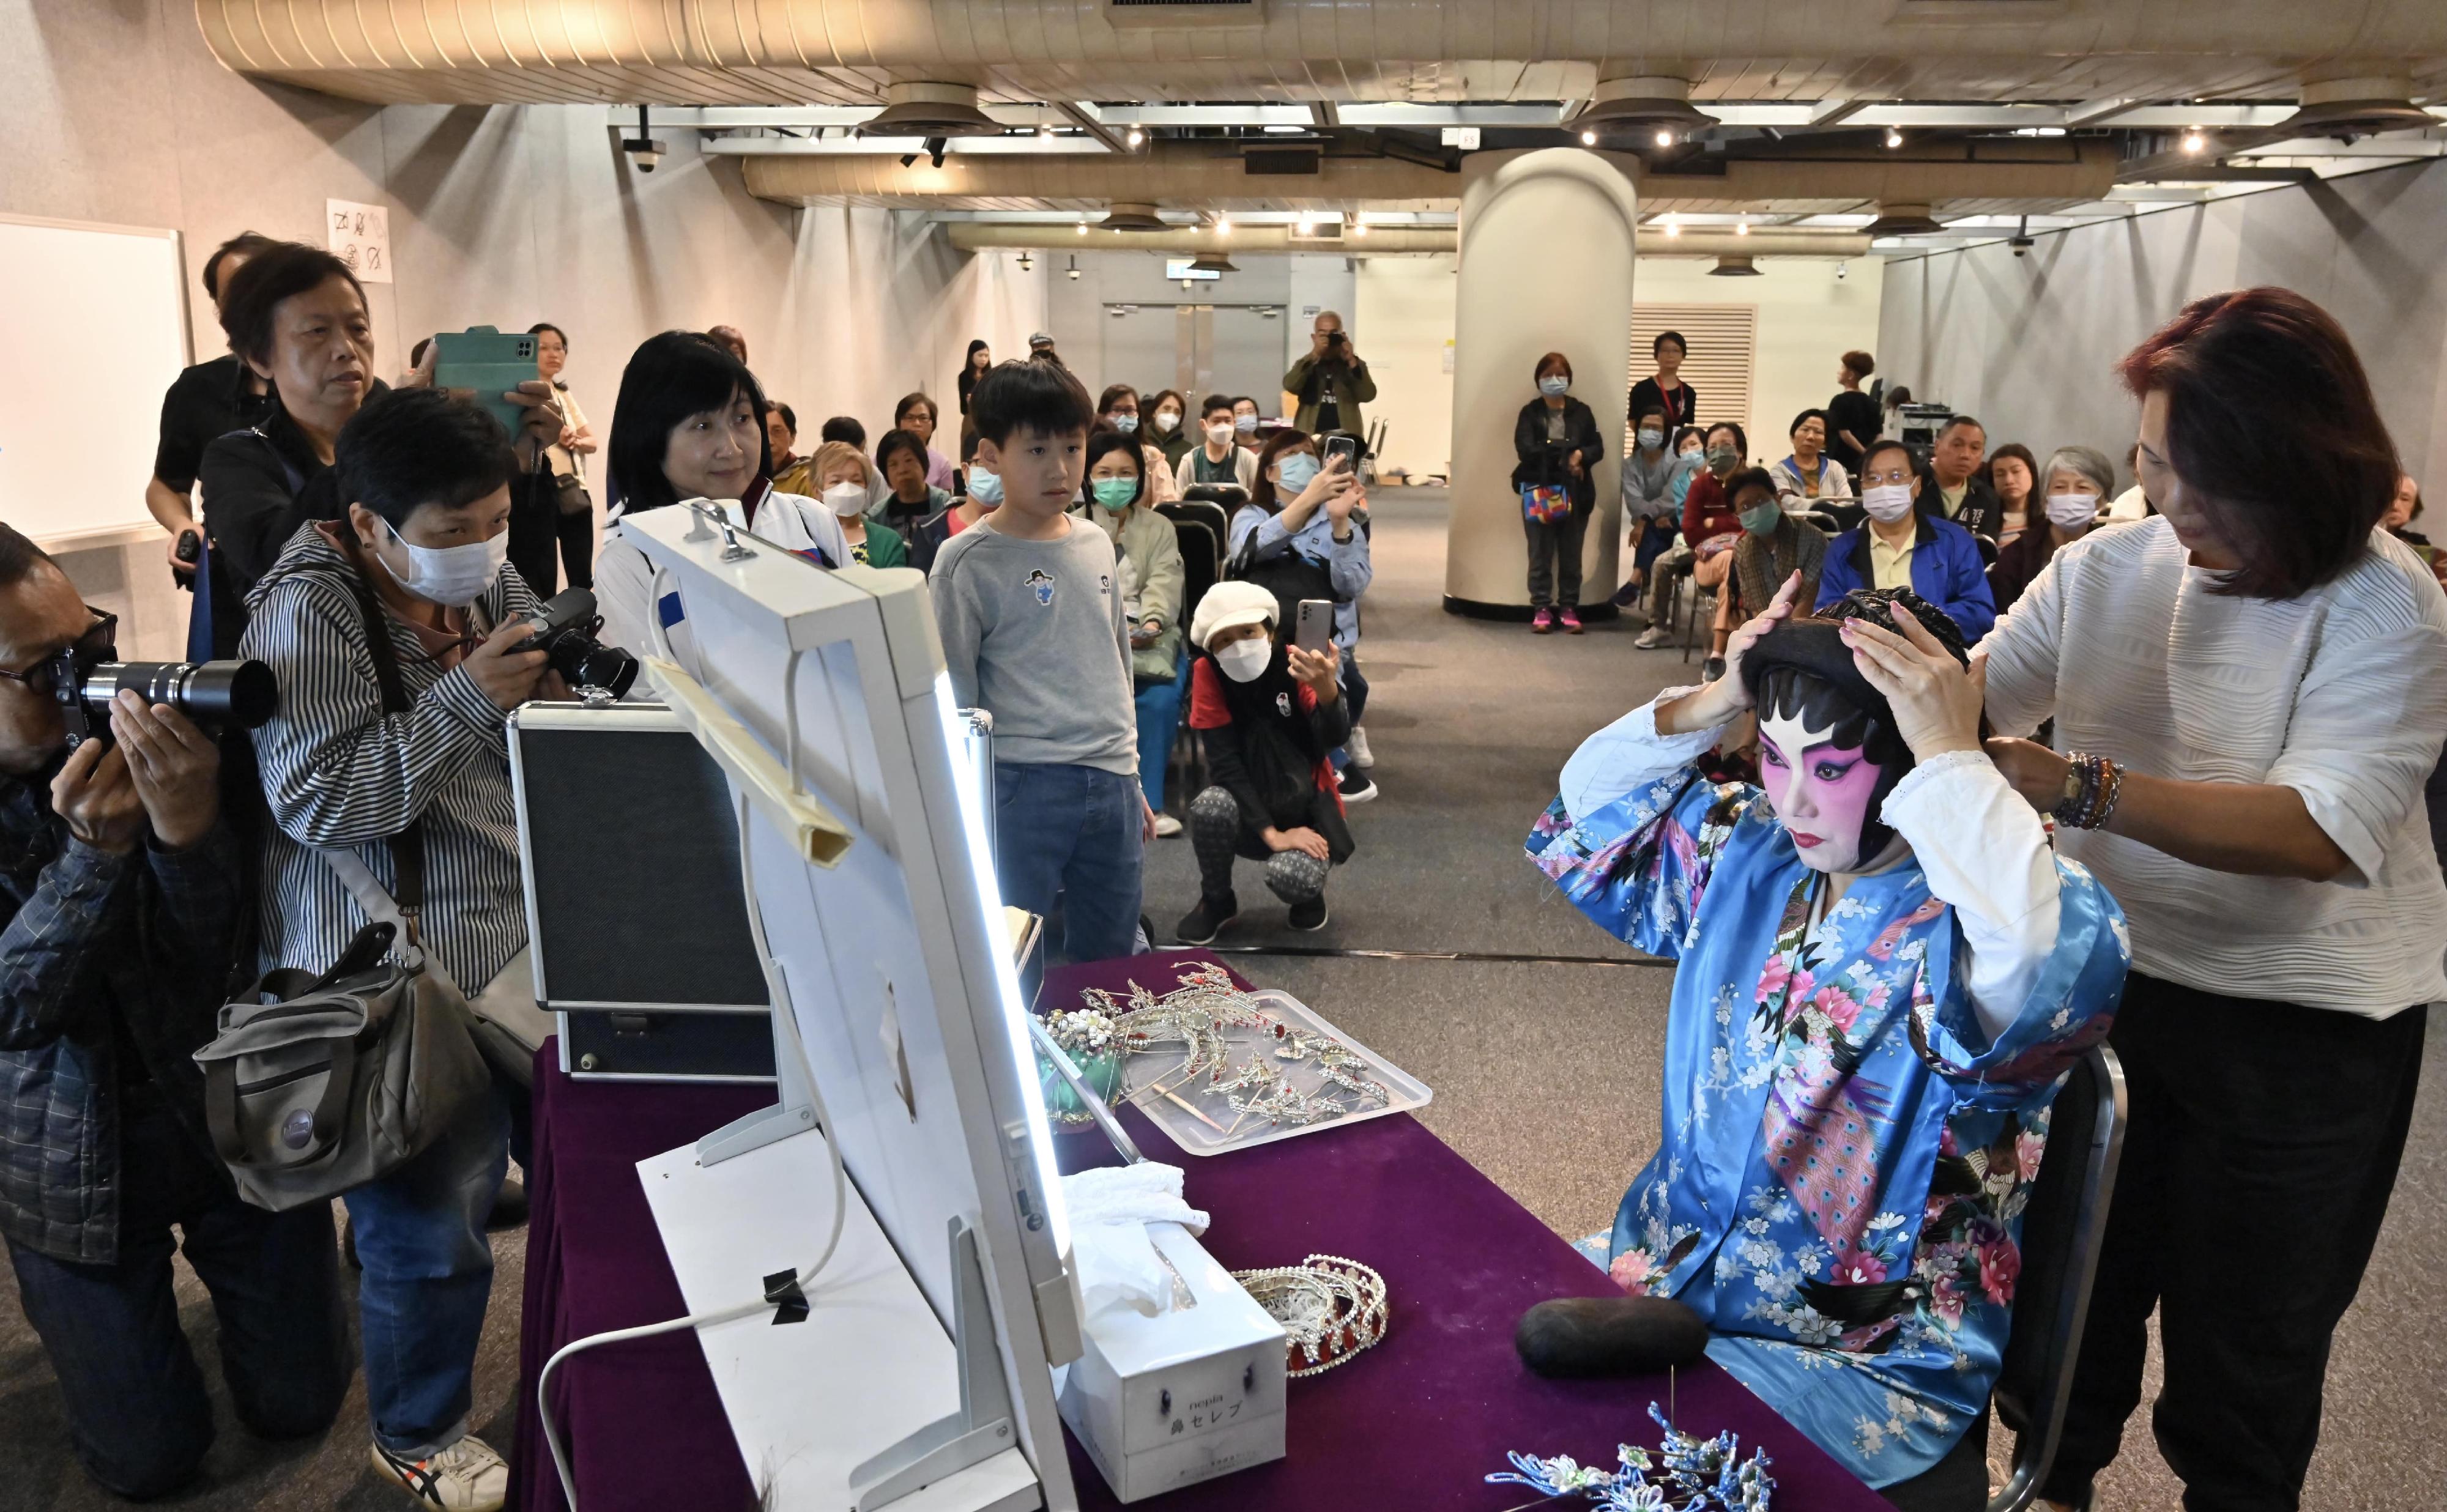 The annual Cantonese Opera Day, presented by the Leisure and Cultural Services Department, was held this afternoon (November 26). Photo shows a Cantonese opera performer demonstrating costume dressing to the audiences.